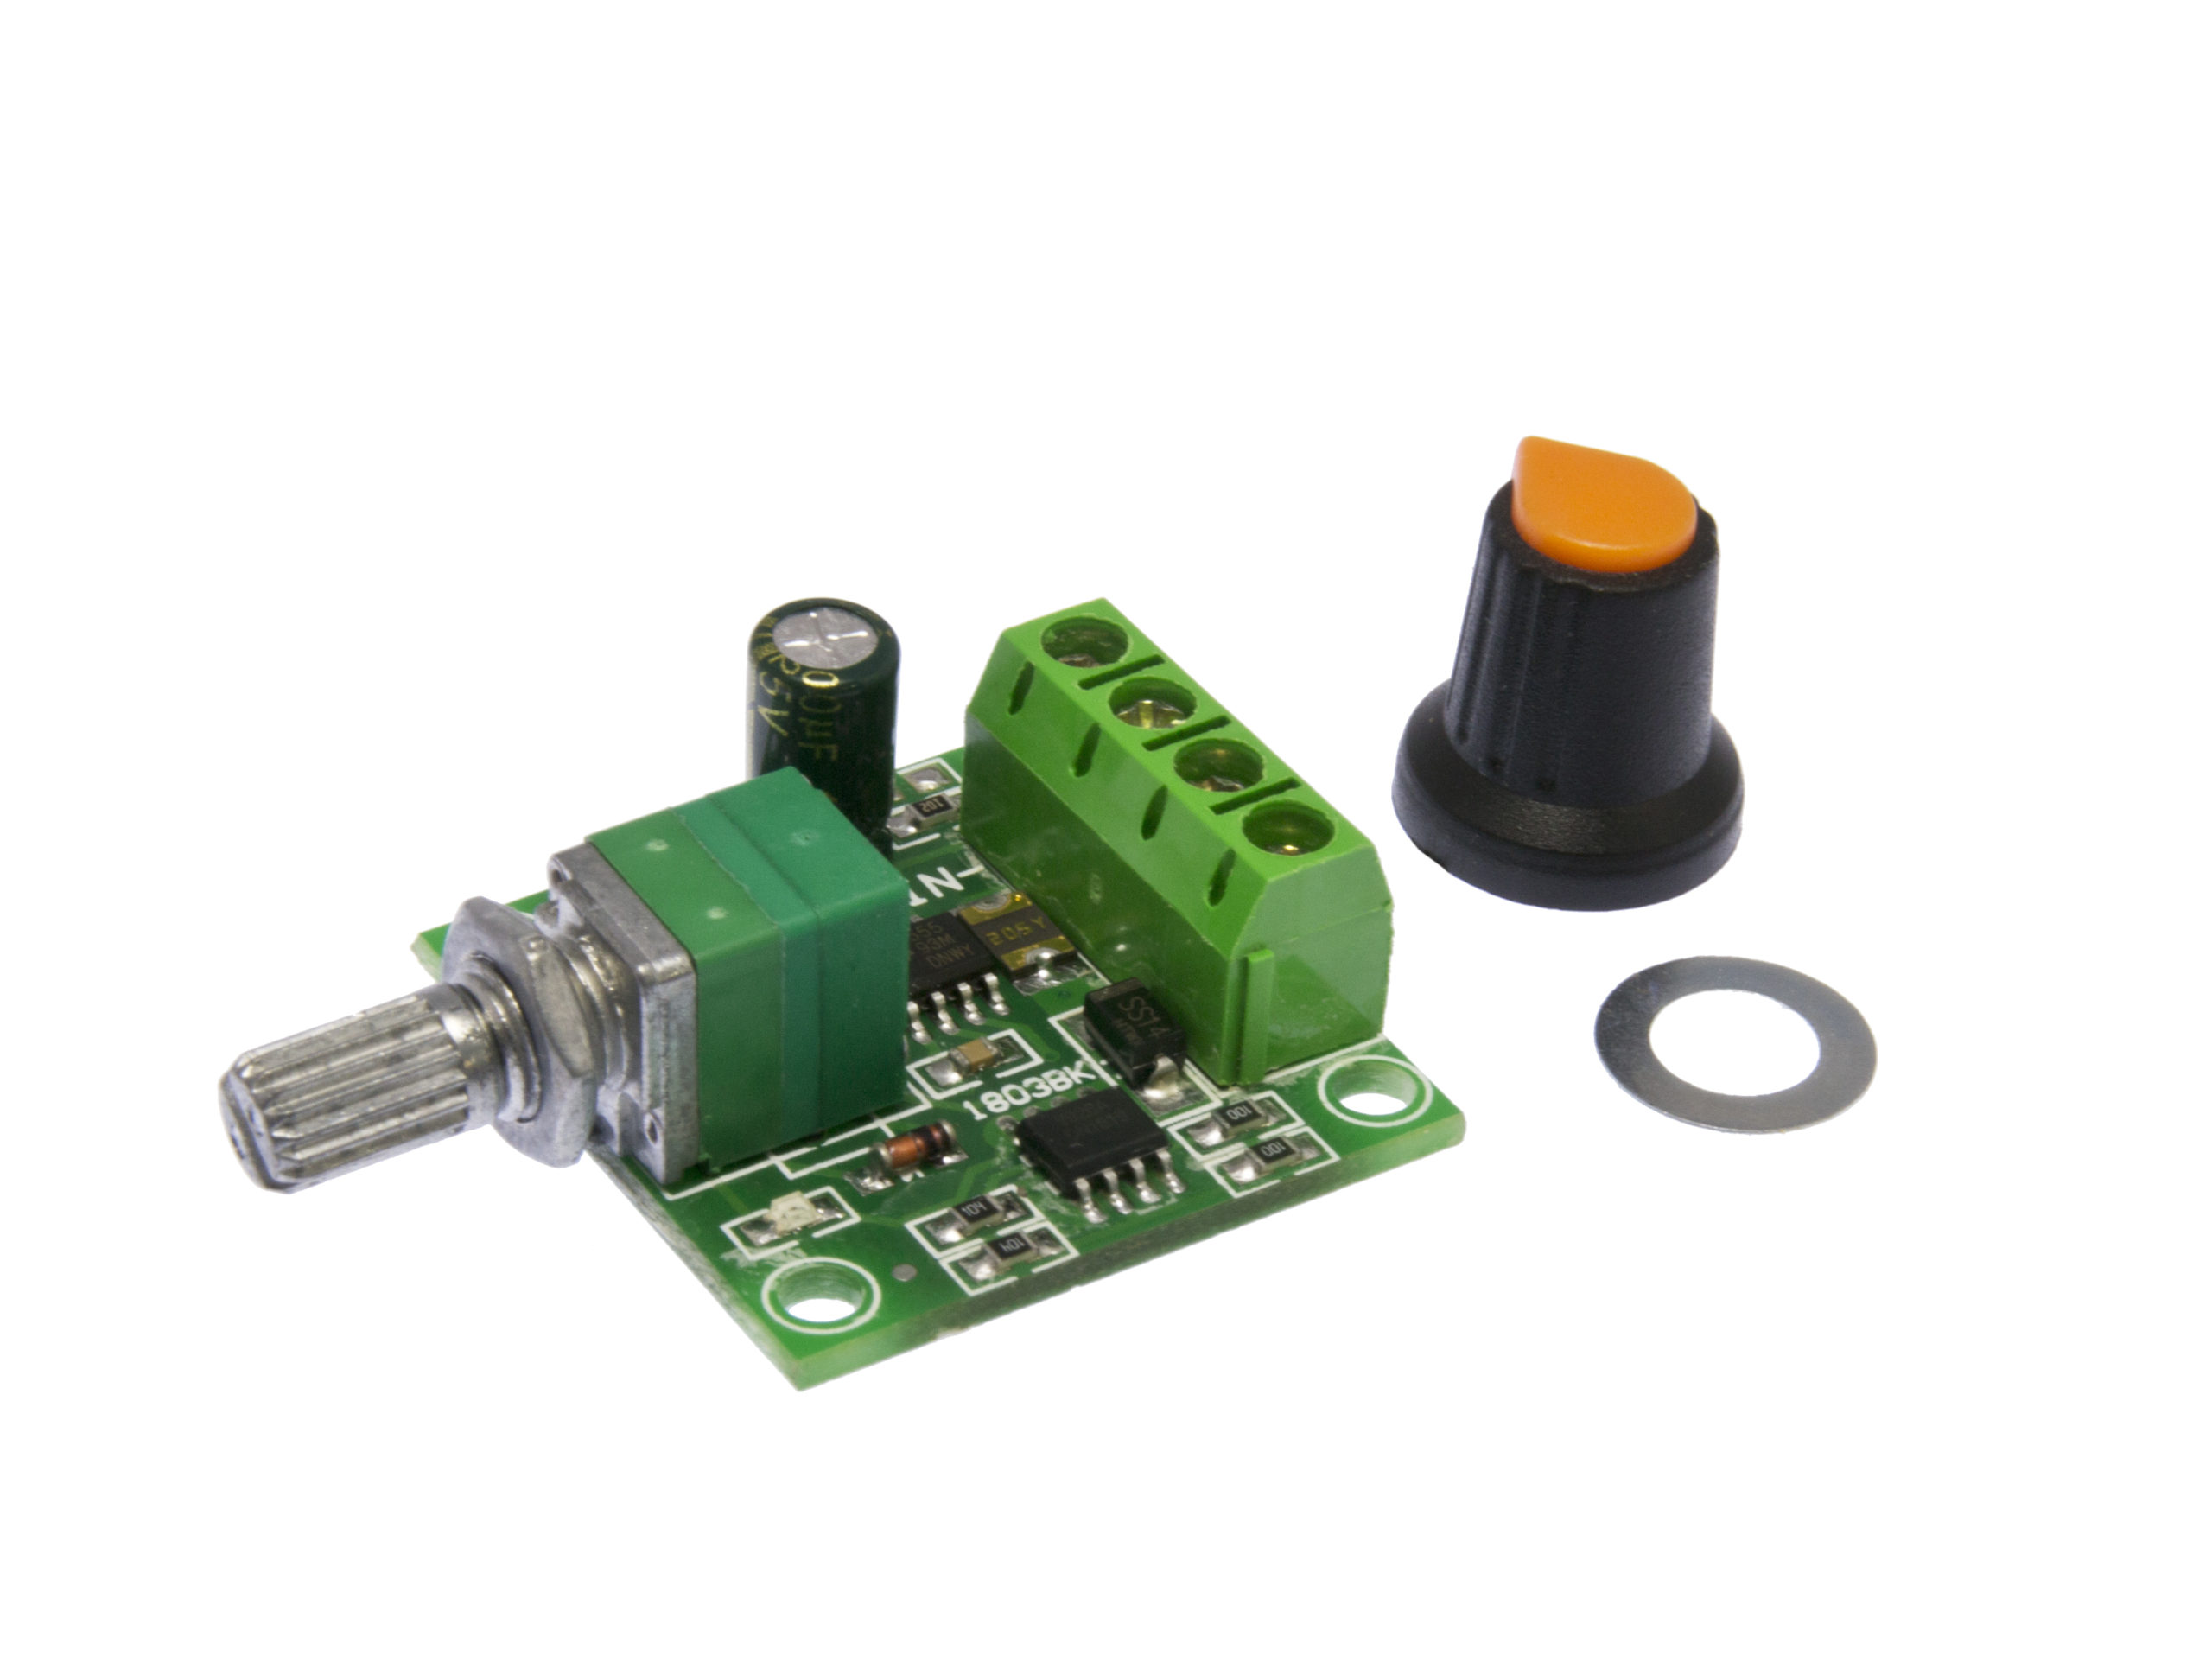 Mini DC 2A Motor PWM Speed Controller Switch 1.8V-15V with insulator mount 